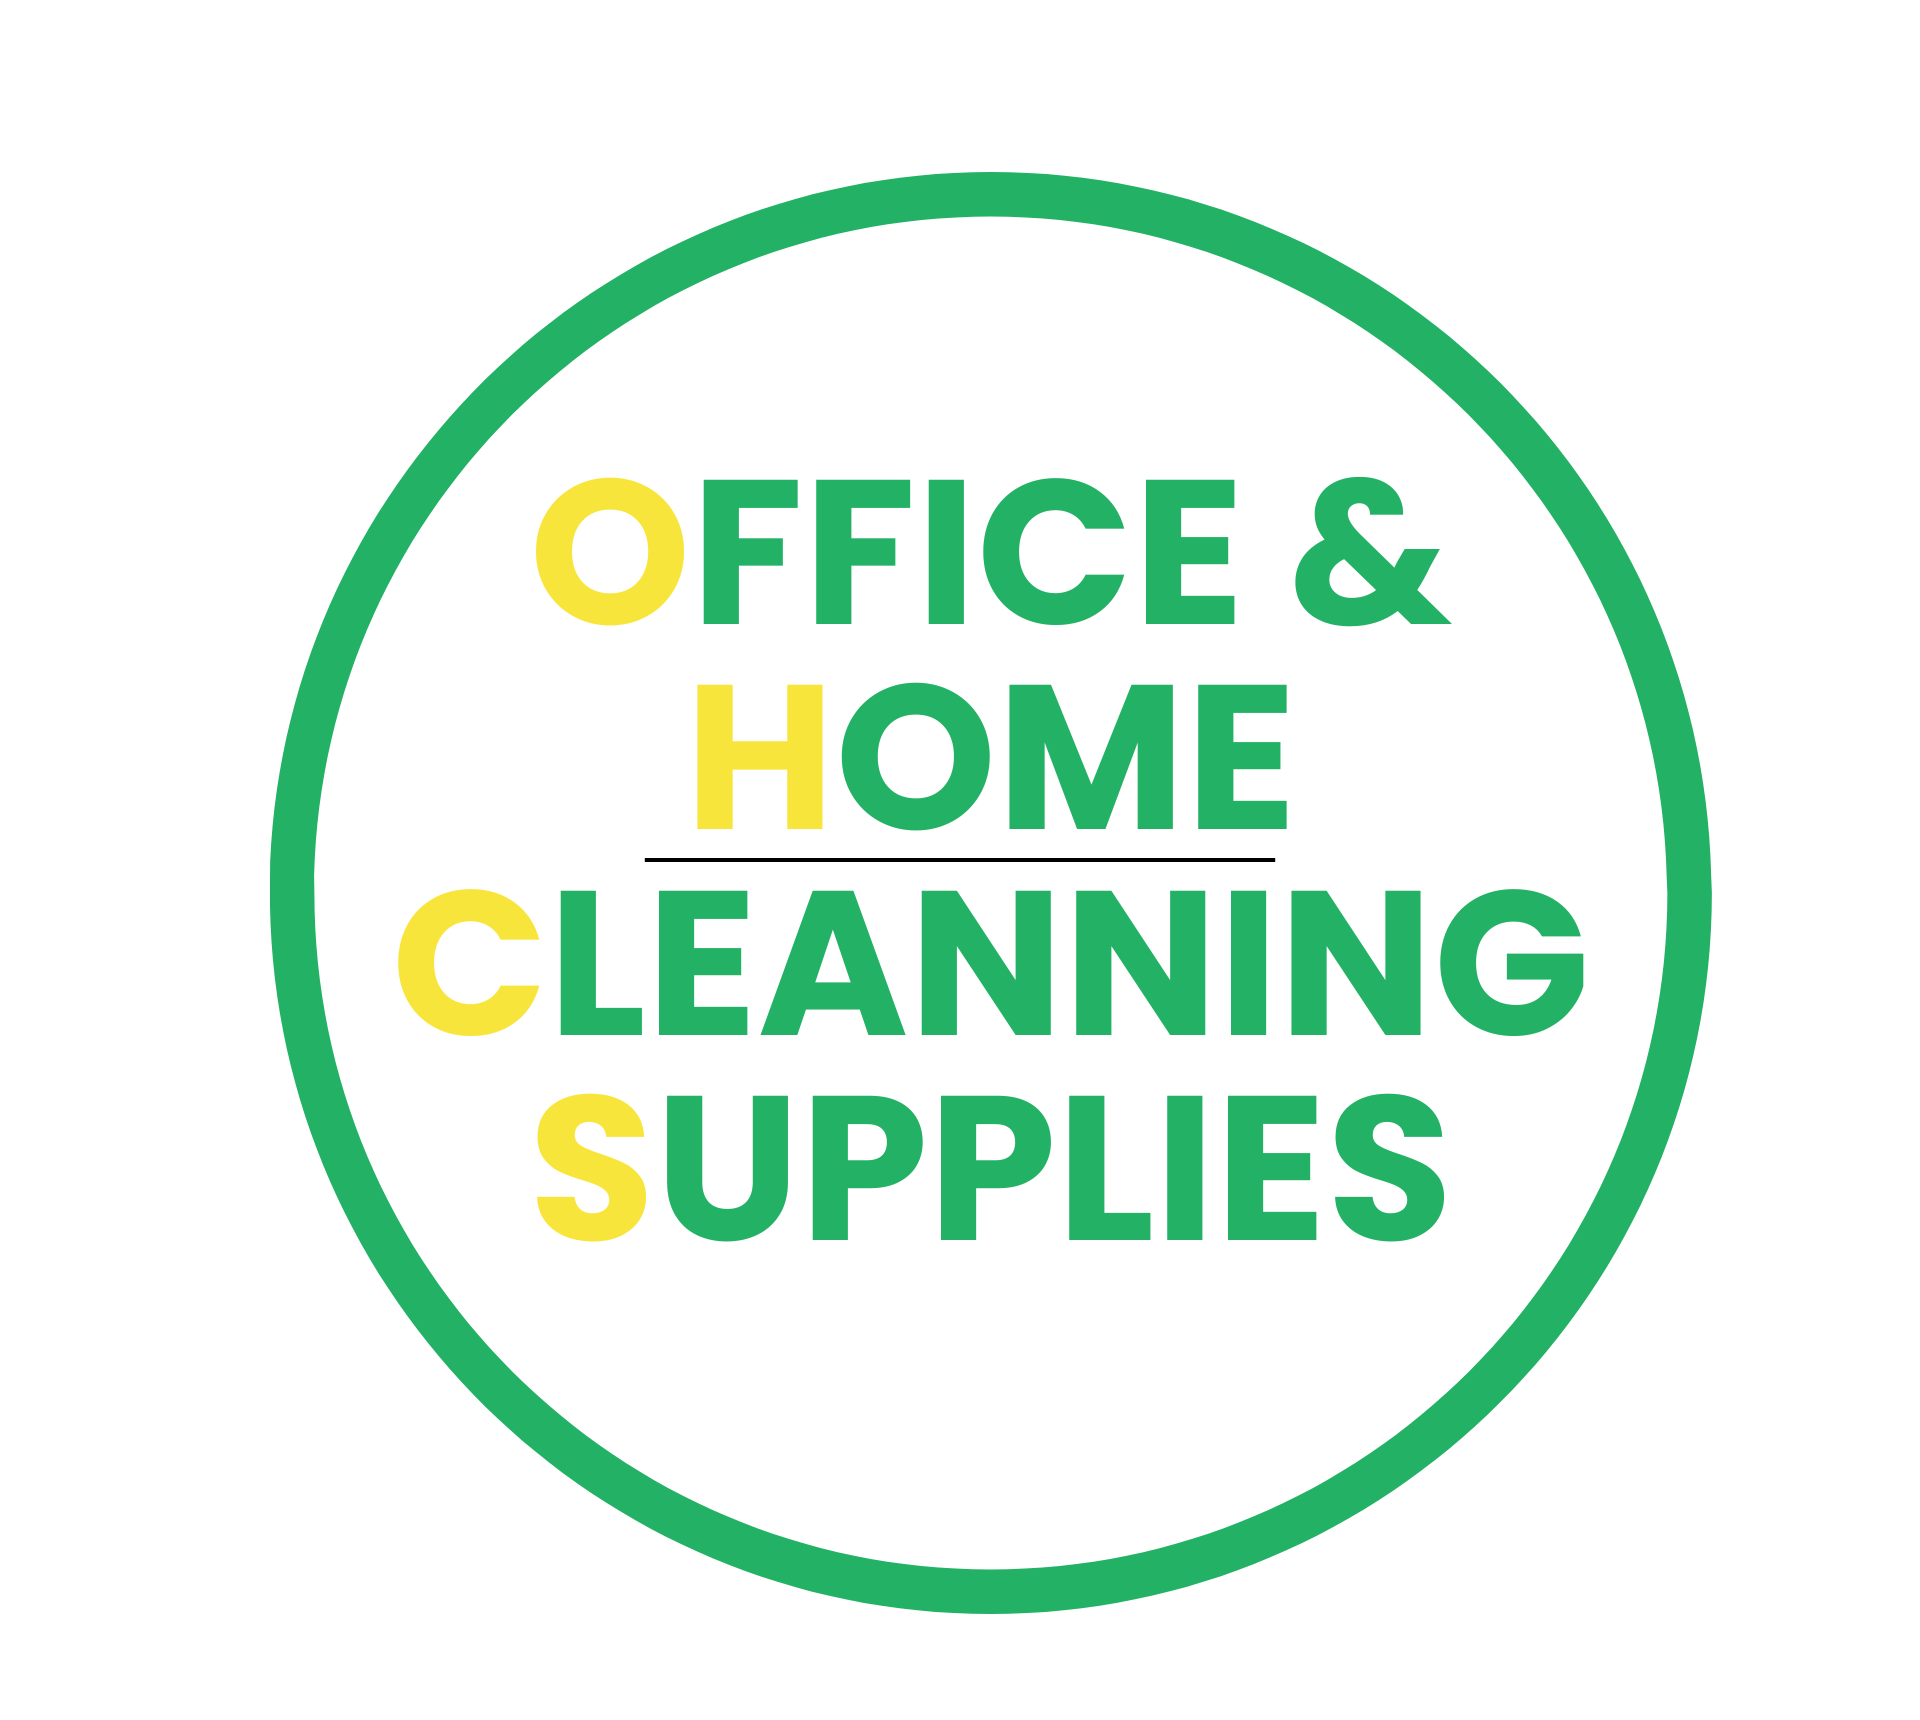 OFFICE & HOME CLEANING SUPPLIES